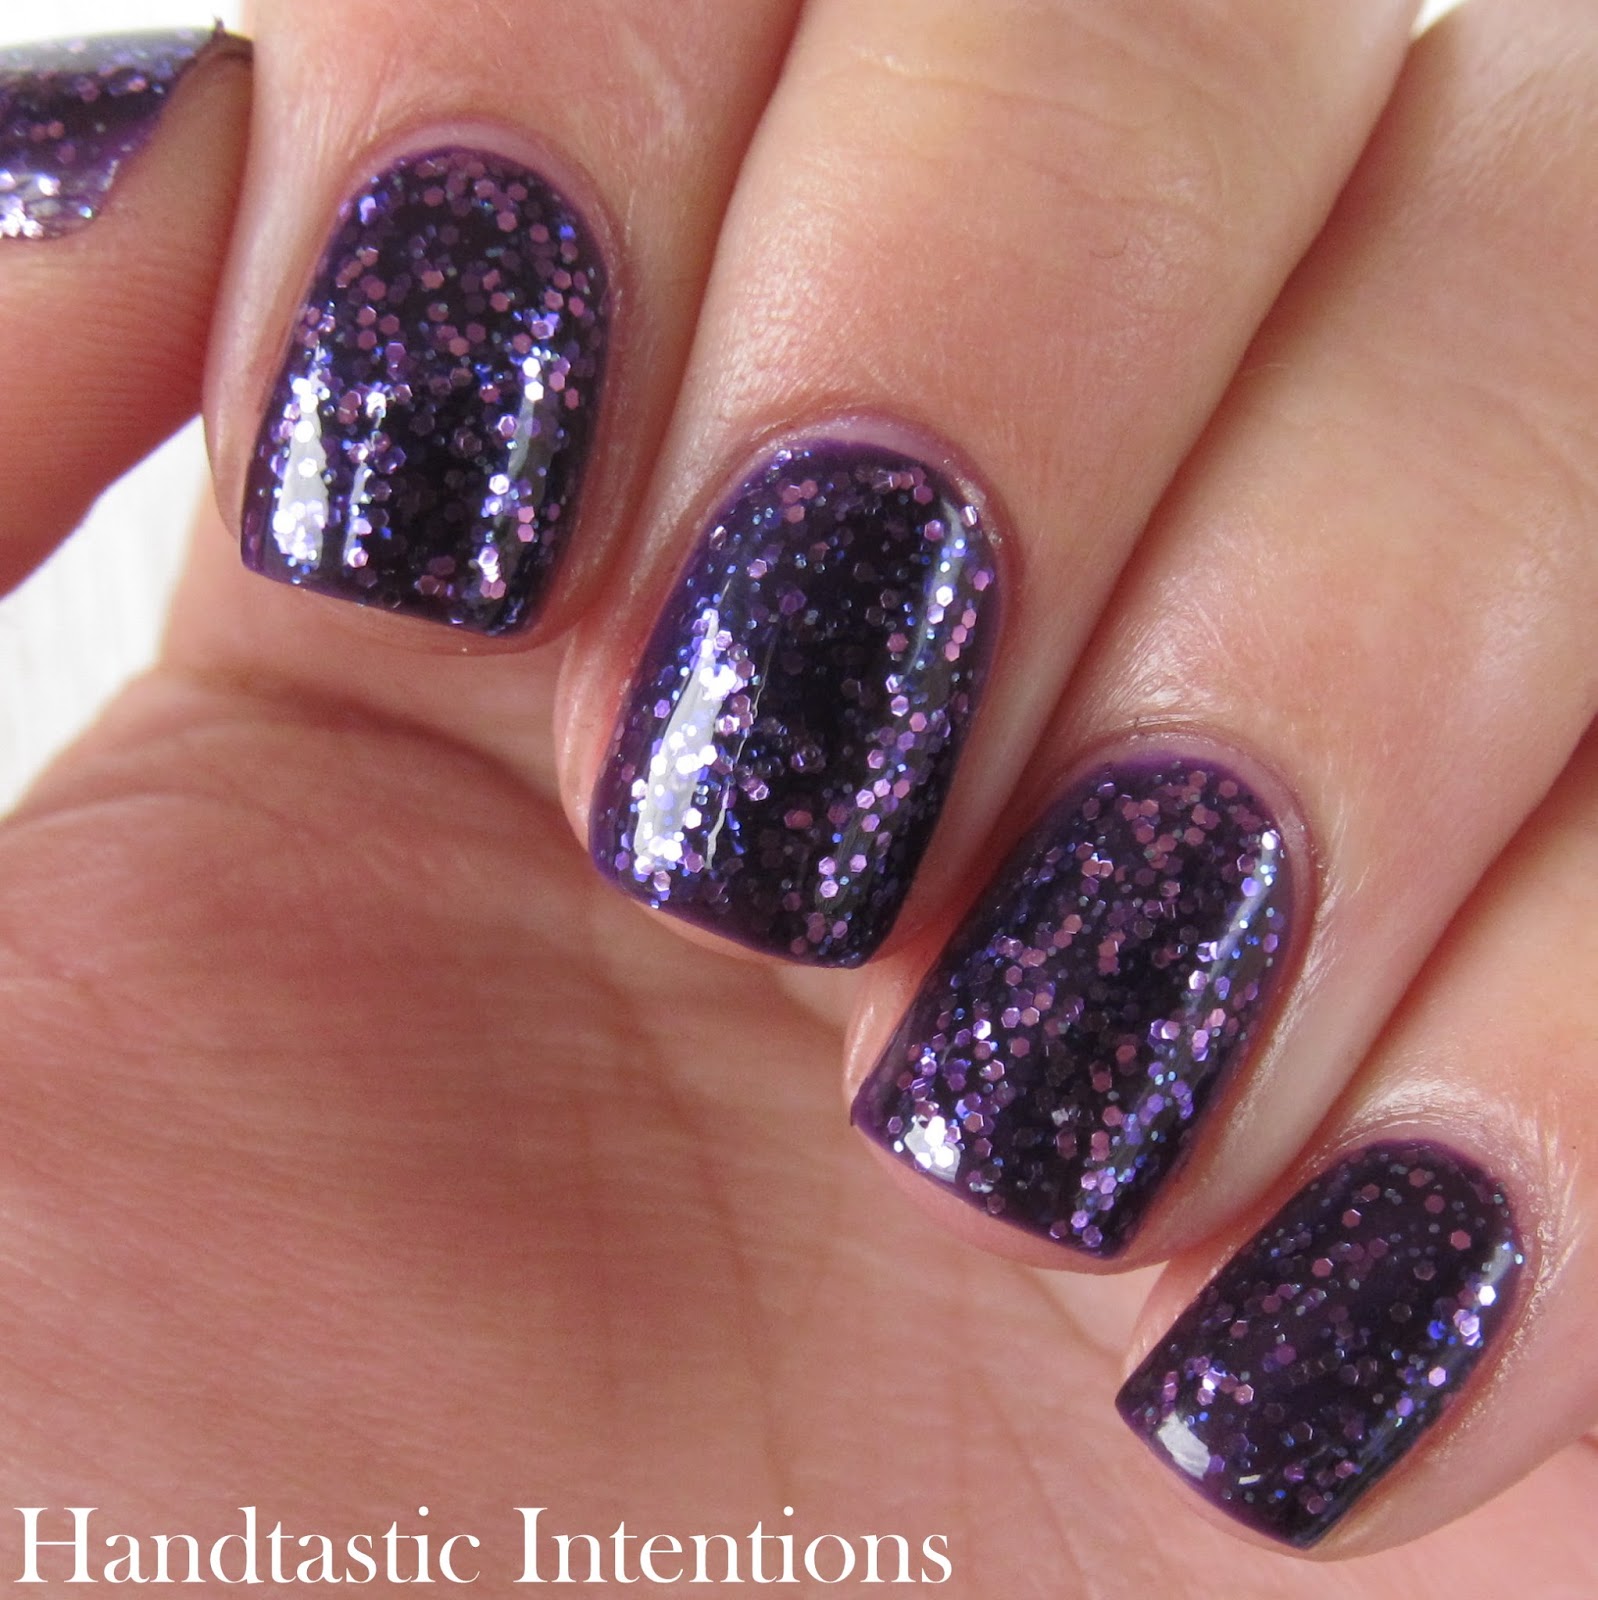 Handtastic Intentions: NYC Crystal Couture NY Princess